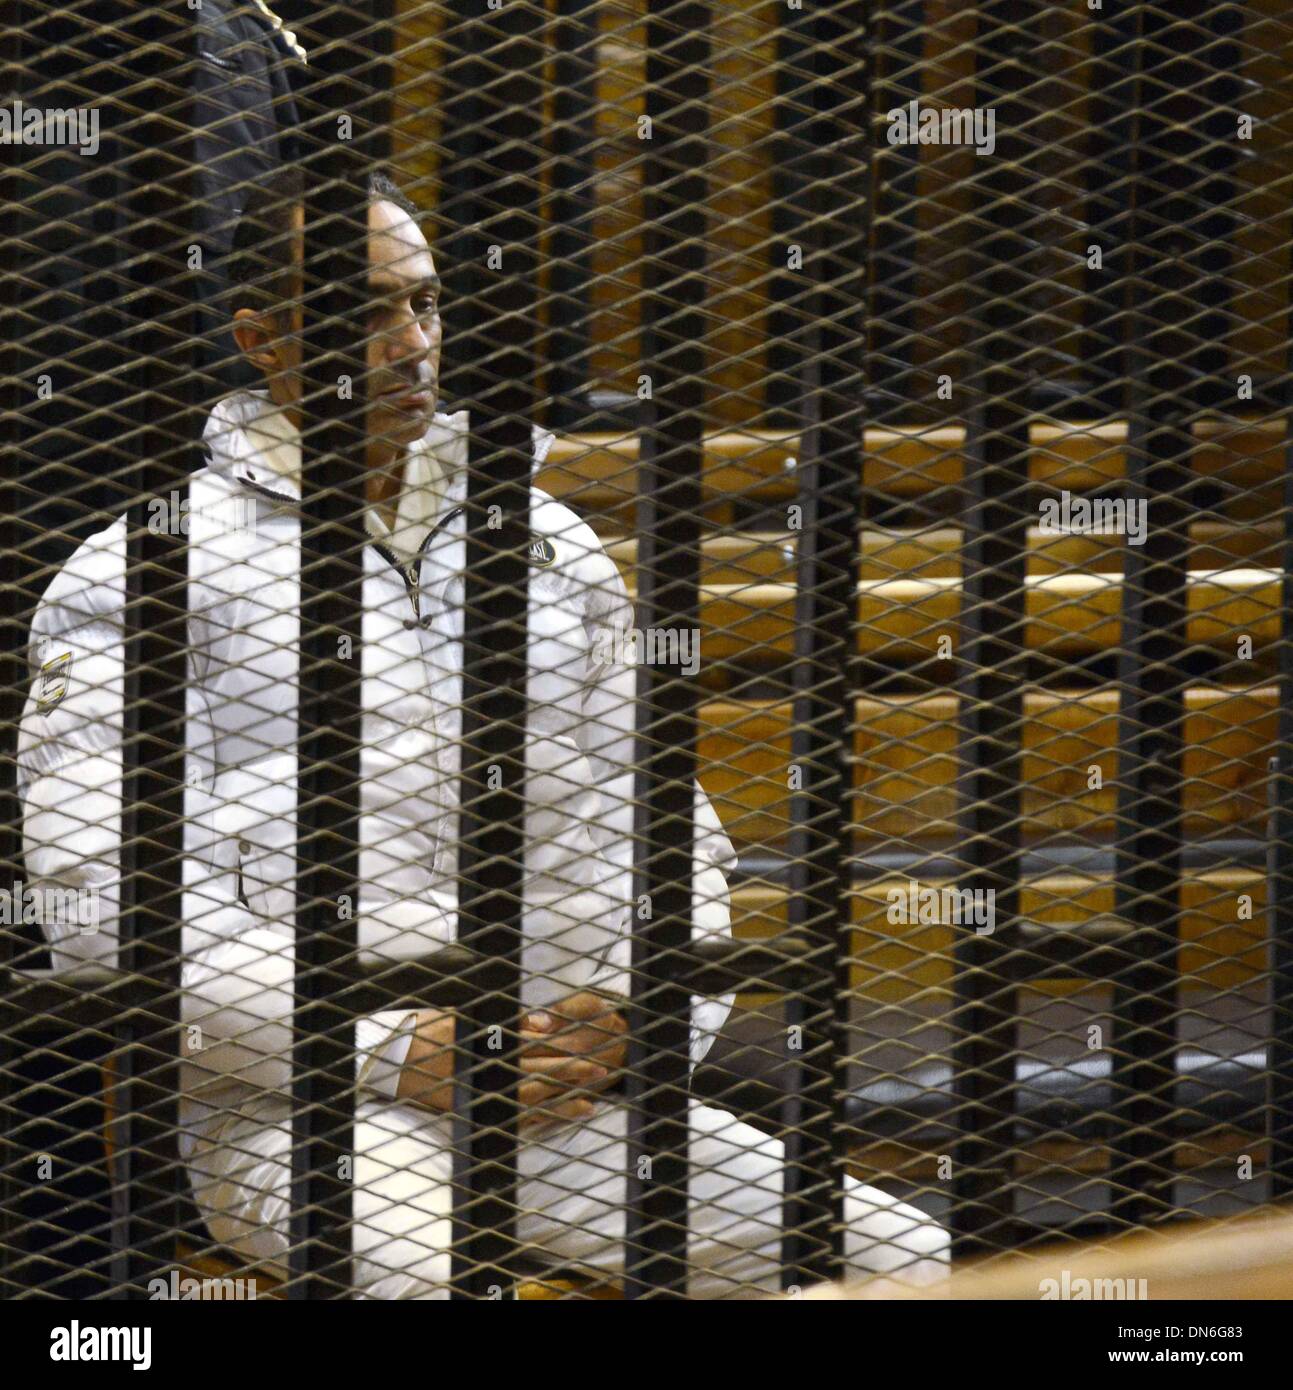 Cairo, Egypt. 19th Dec, 2013. Gamal Mubarak, son of former Egyptian leader Hosni Mubarak, sits inside the defendant's cage at a court in Cairo, Egypt, Dec. 19, 2013. An Egyptian court on Thursday ordered to acquit Mubarak's two sons Alaa and Gamal, and former prime minister Ahmed Shafiq, who were charged of misuse of public funds, Middle East News Agency reported. Credit:  Ahmed Omar/Xinhua/Alamy Live News Stock Photo